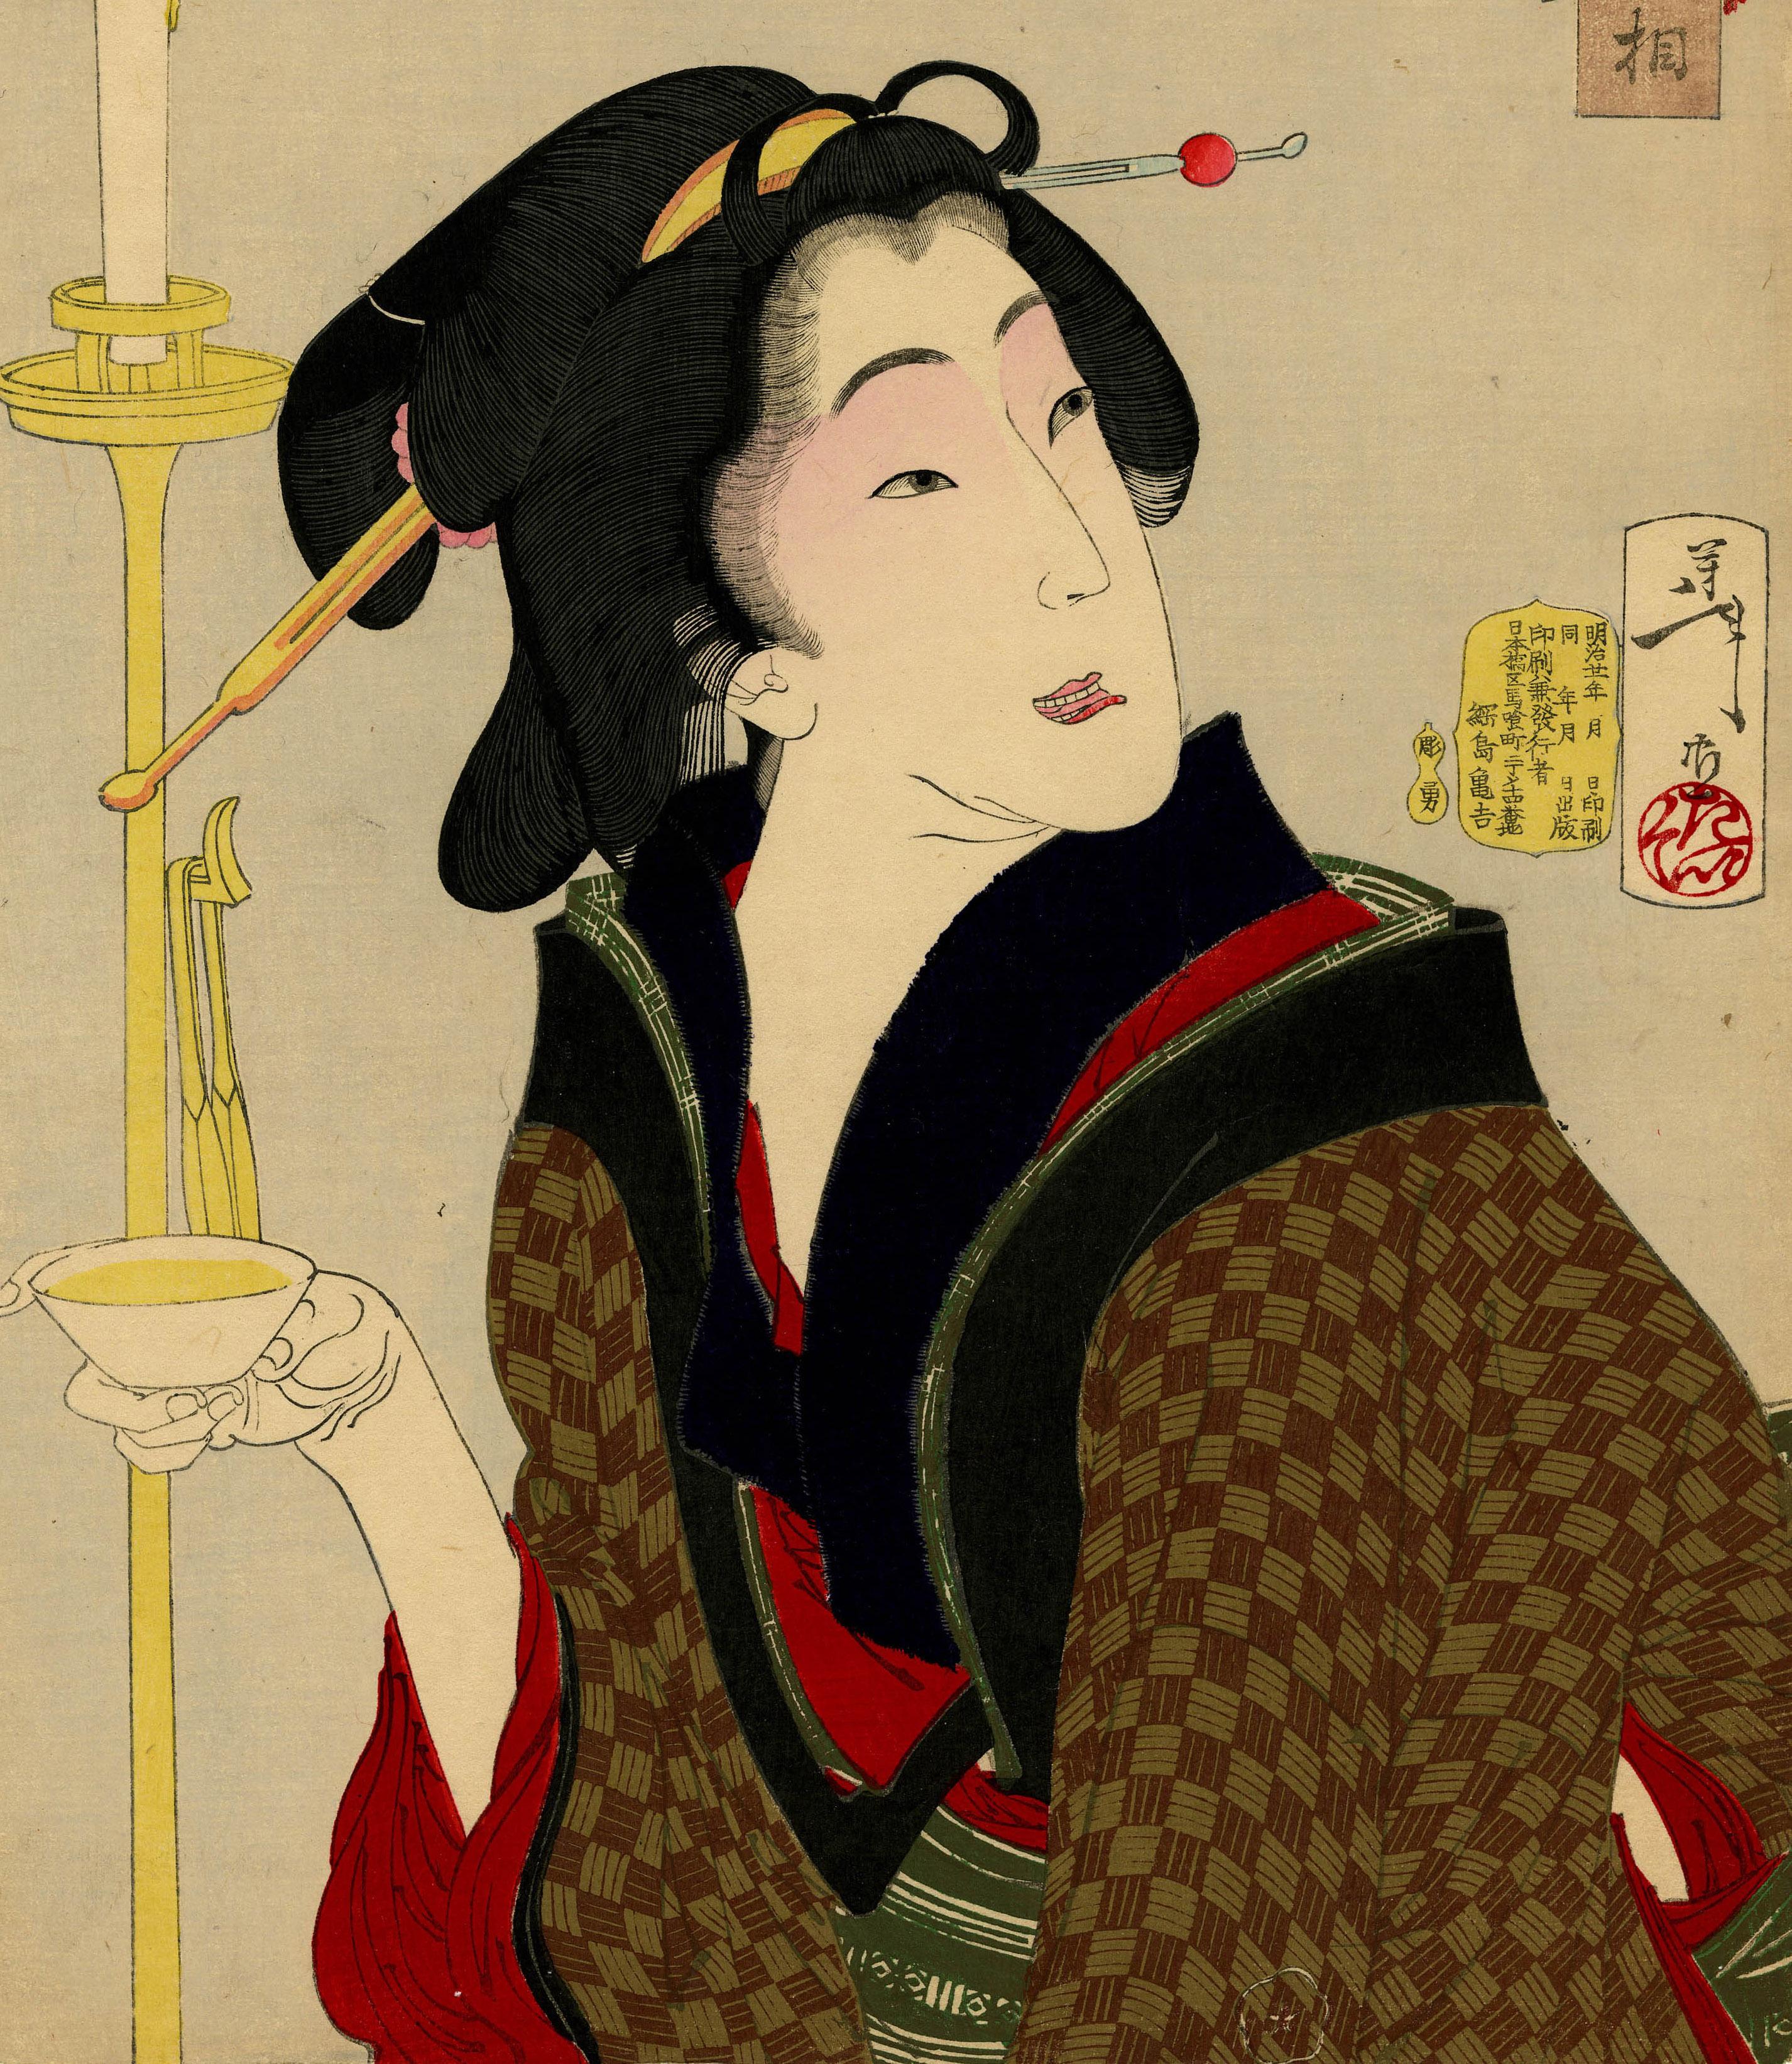 Thirsty: The Appearance of a Town Geisha - a So-Called Wine- Server - in der Anse (Beige), Figurative Print, von Taiso Yoshitoshi